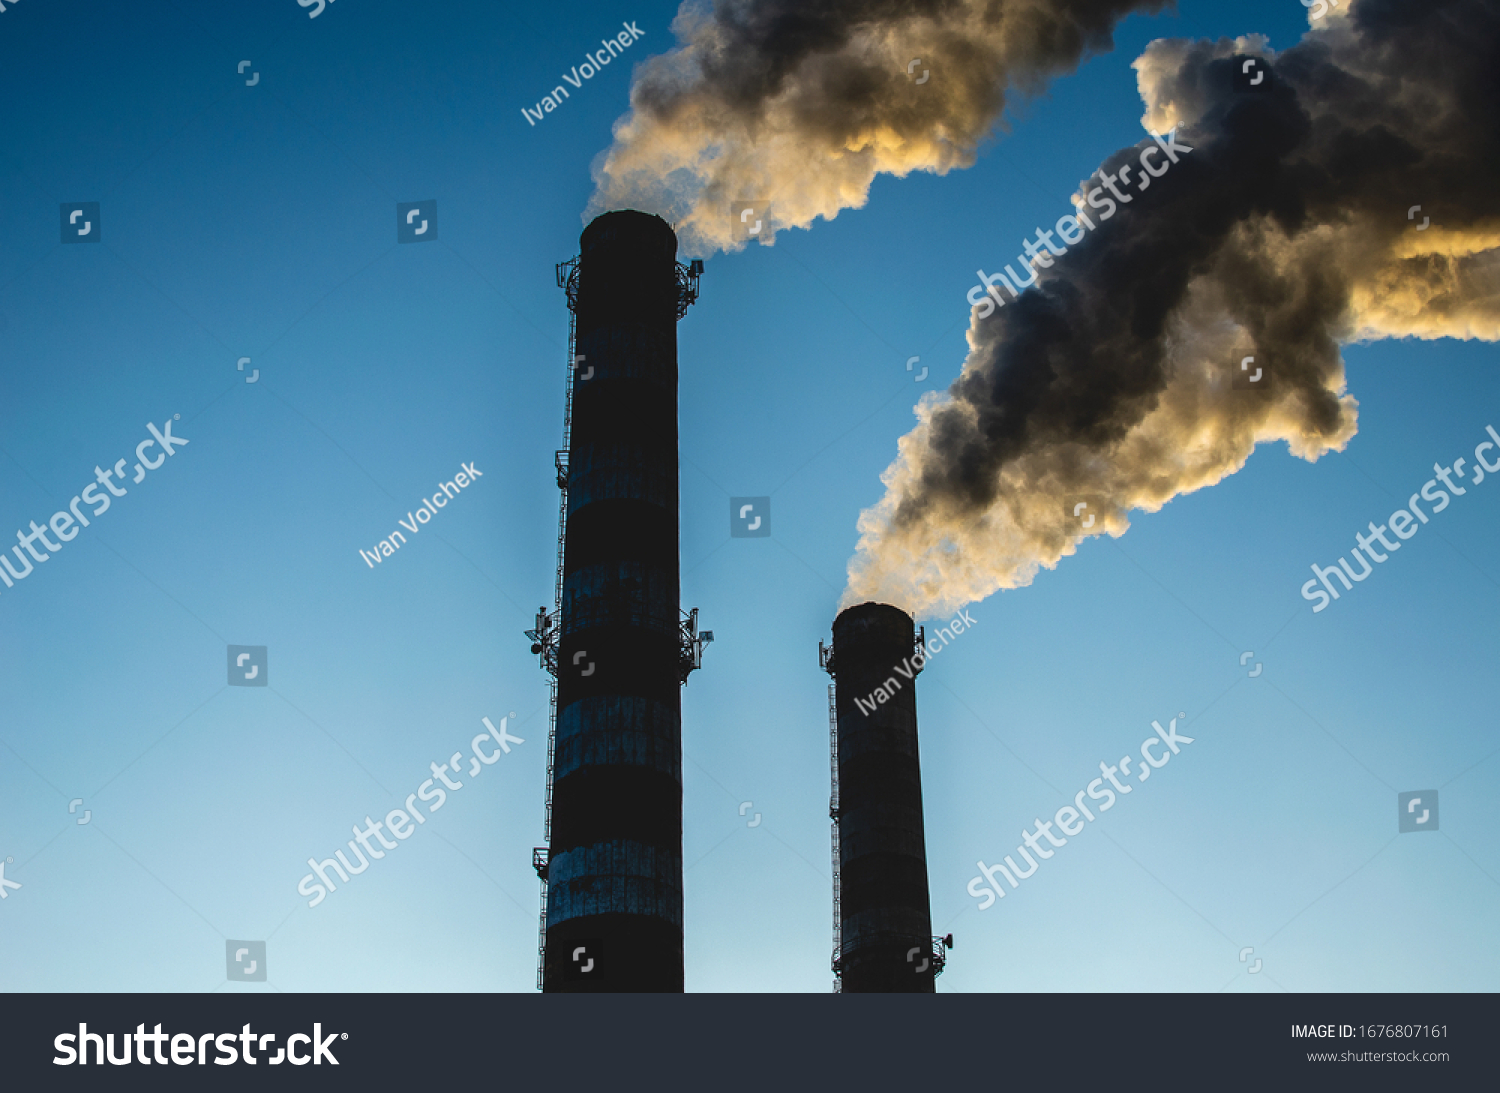 Exhaust fumes blown into a sky. Smoke from industrial chimneys against a blue sky. Smoke from factory chimneys in an urban environment. Concept: environmental pollution, ecology #1676807161